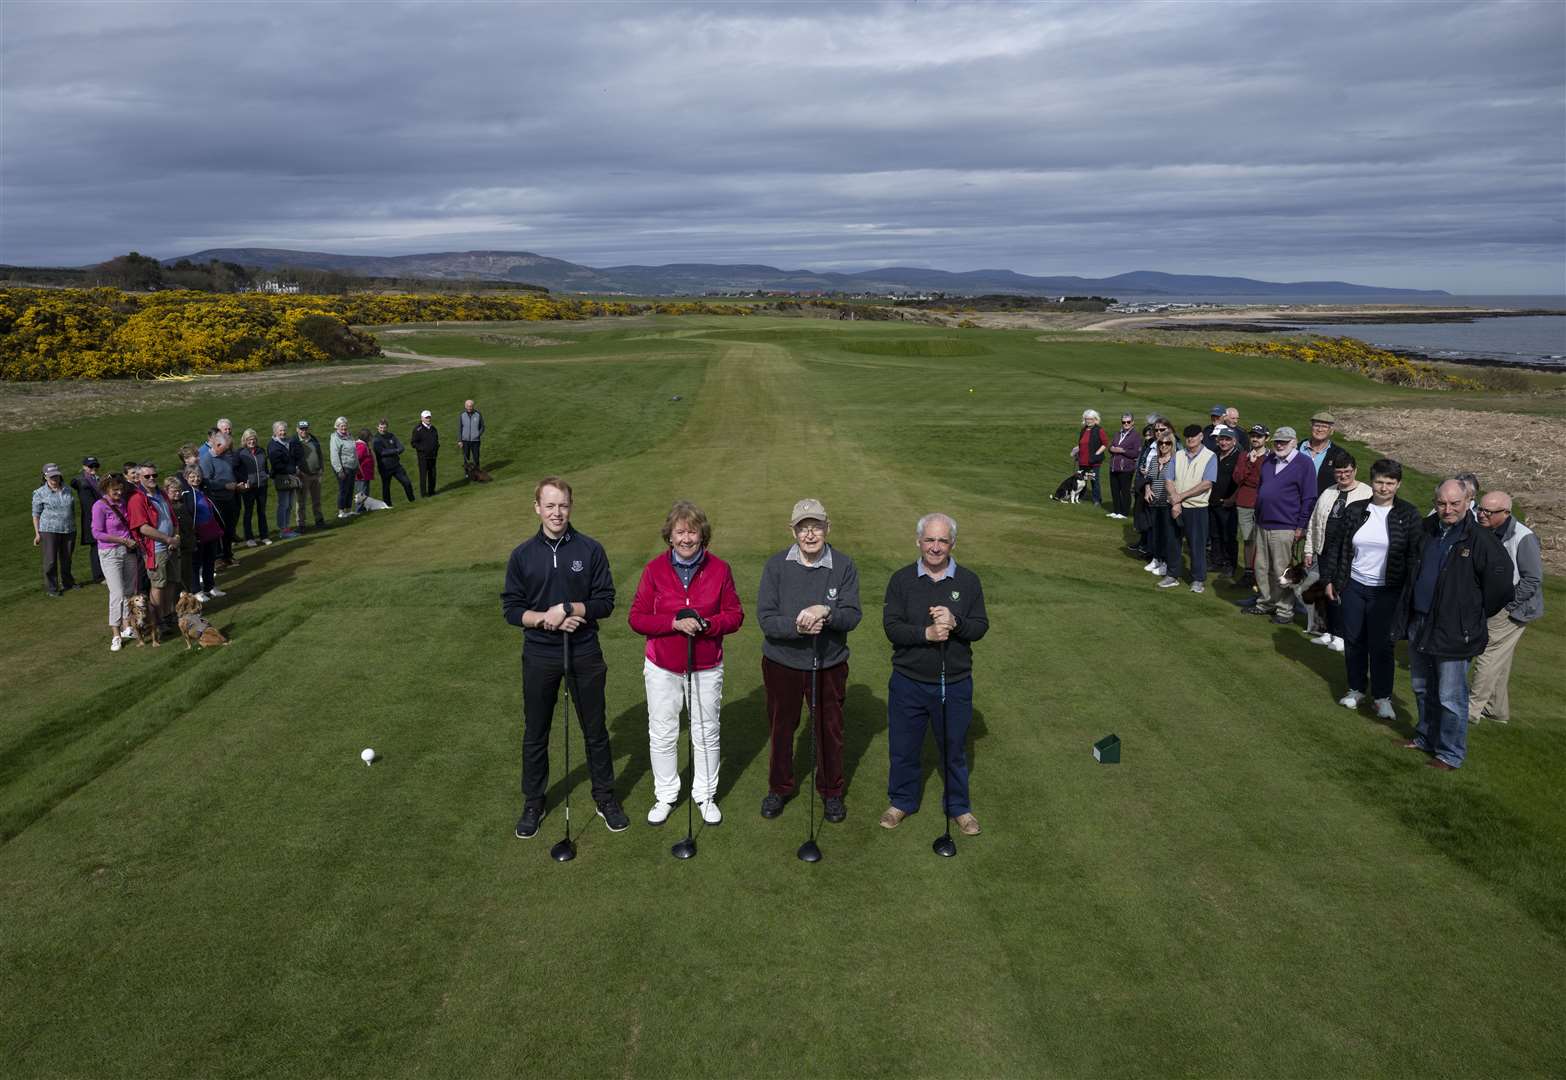 Official opening of the renovated / re design of the 8th hole teeing area and fairway by Mackenzie Ebert architects on the Championship course,Royal Dornoch, Dornoch, Sutherland,Scotland. Credit: Matthew Harris / Royal Dornoch GC